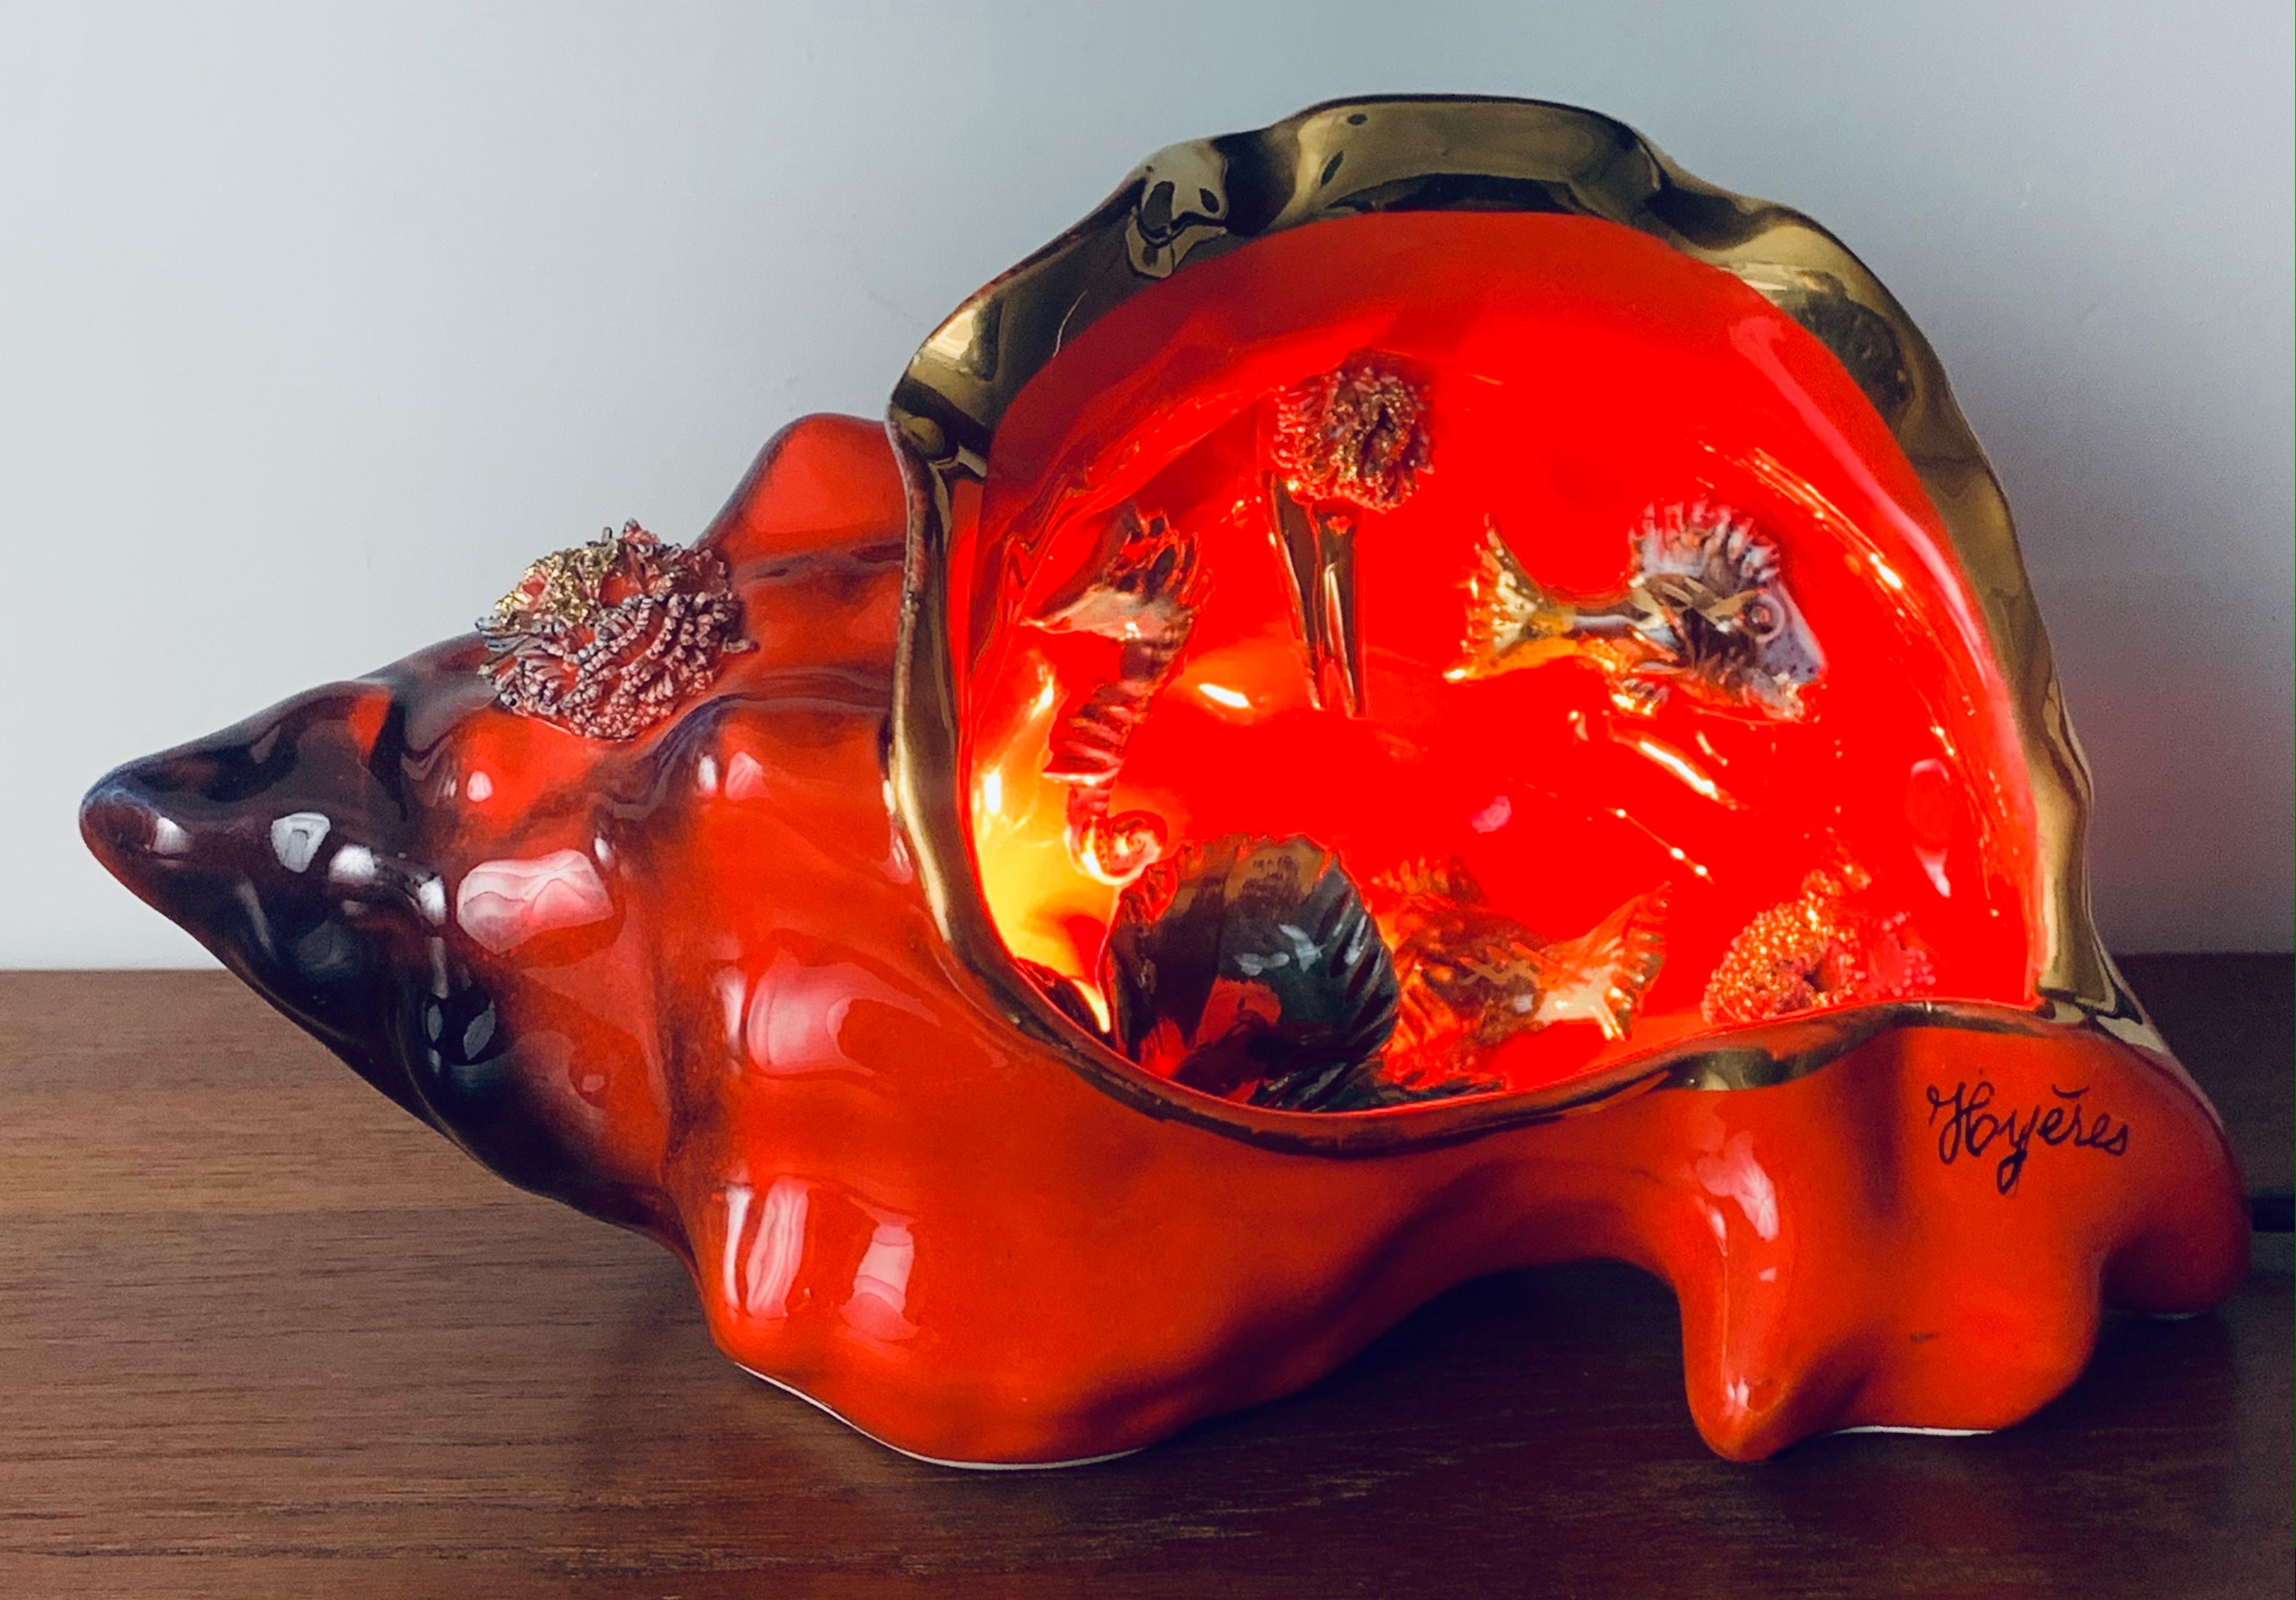 An interesting and kitsch Vallauris ceramic decorative table lamp from the 1950s/1960s in the shape of a Foxhead shell. A fantasy wonderland under the seabed illuminated by a single E14 screw in bulb sits within the shell. The attention to detail of